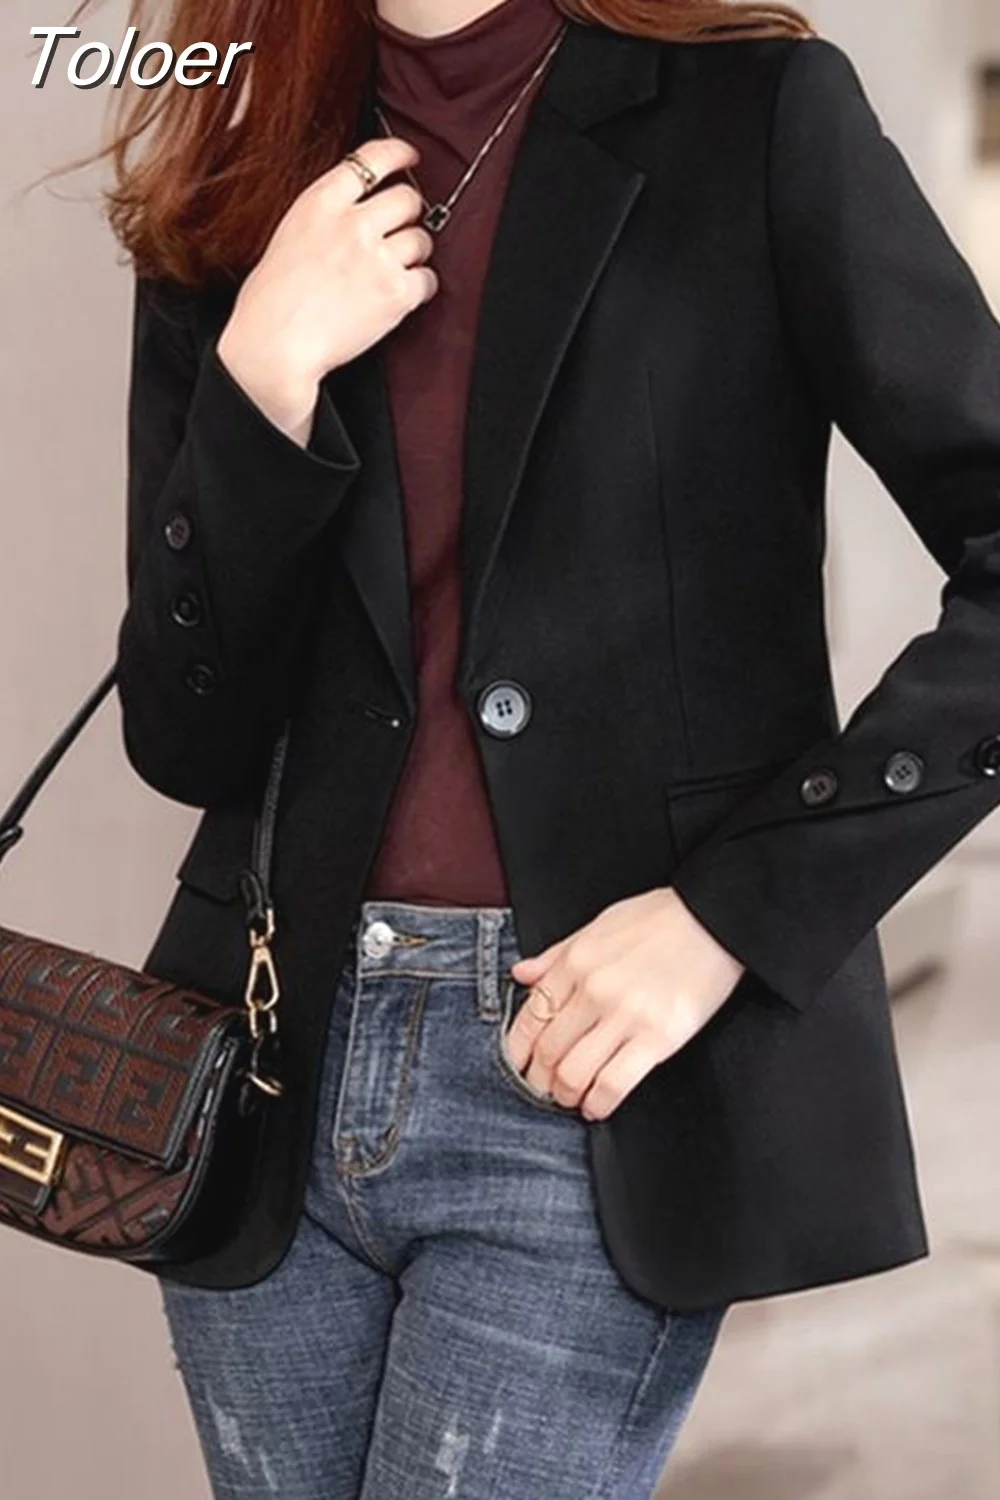 Toloer Lady Blazers Fashion High Street All-match Long Sleeve Casual Fashionable Temperament Blazer Chic Clothing New